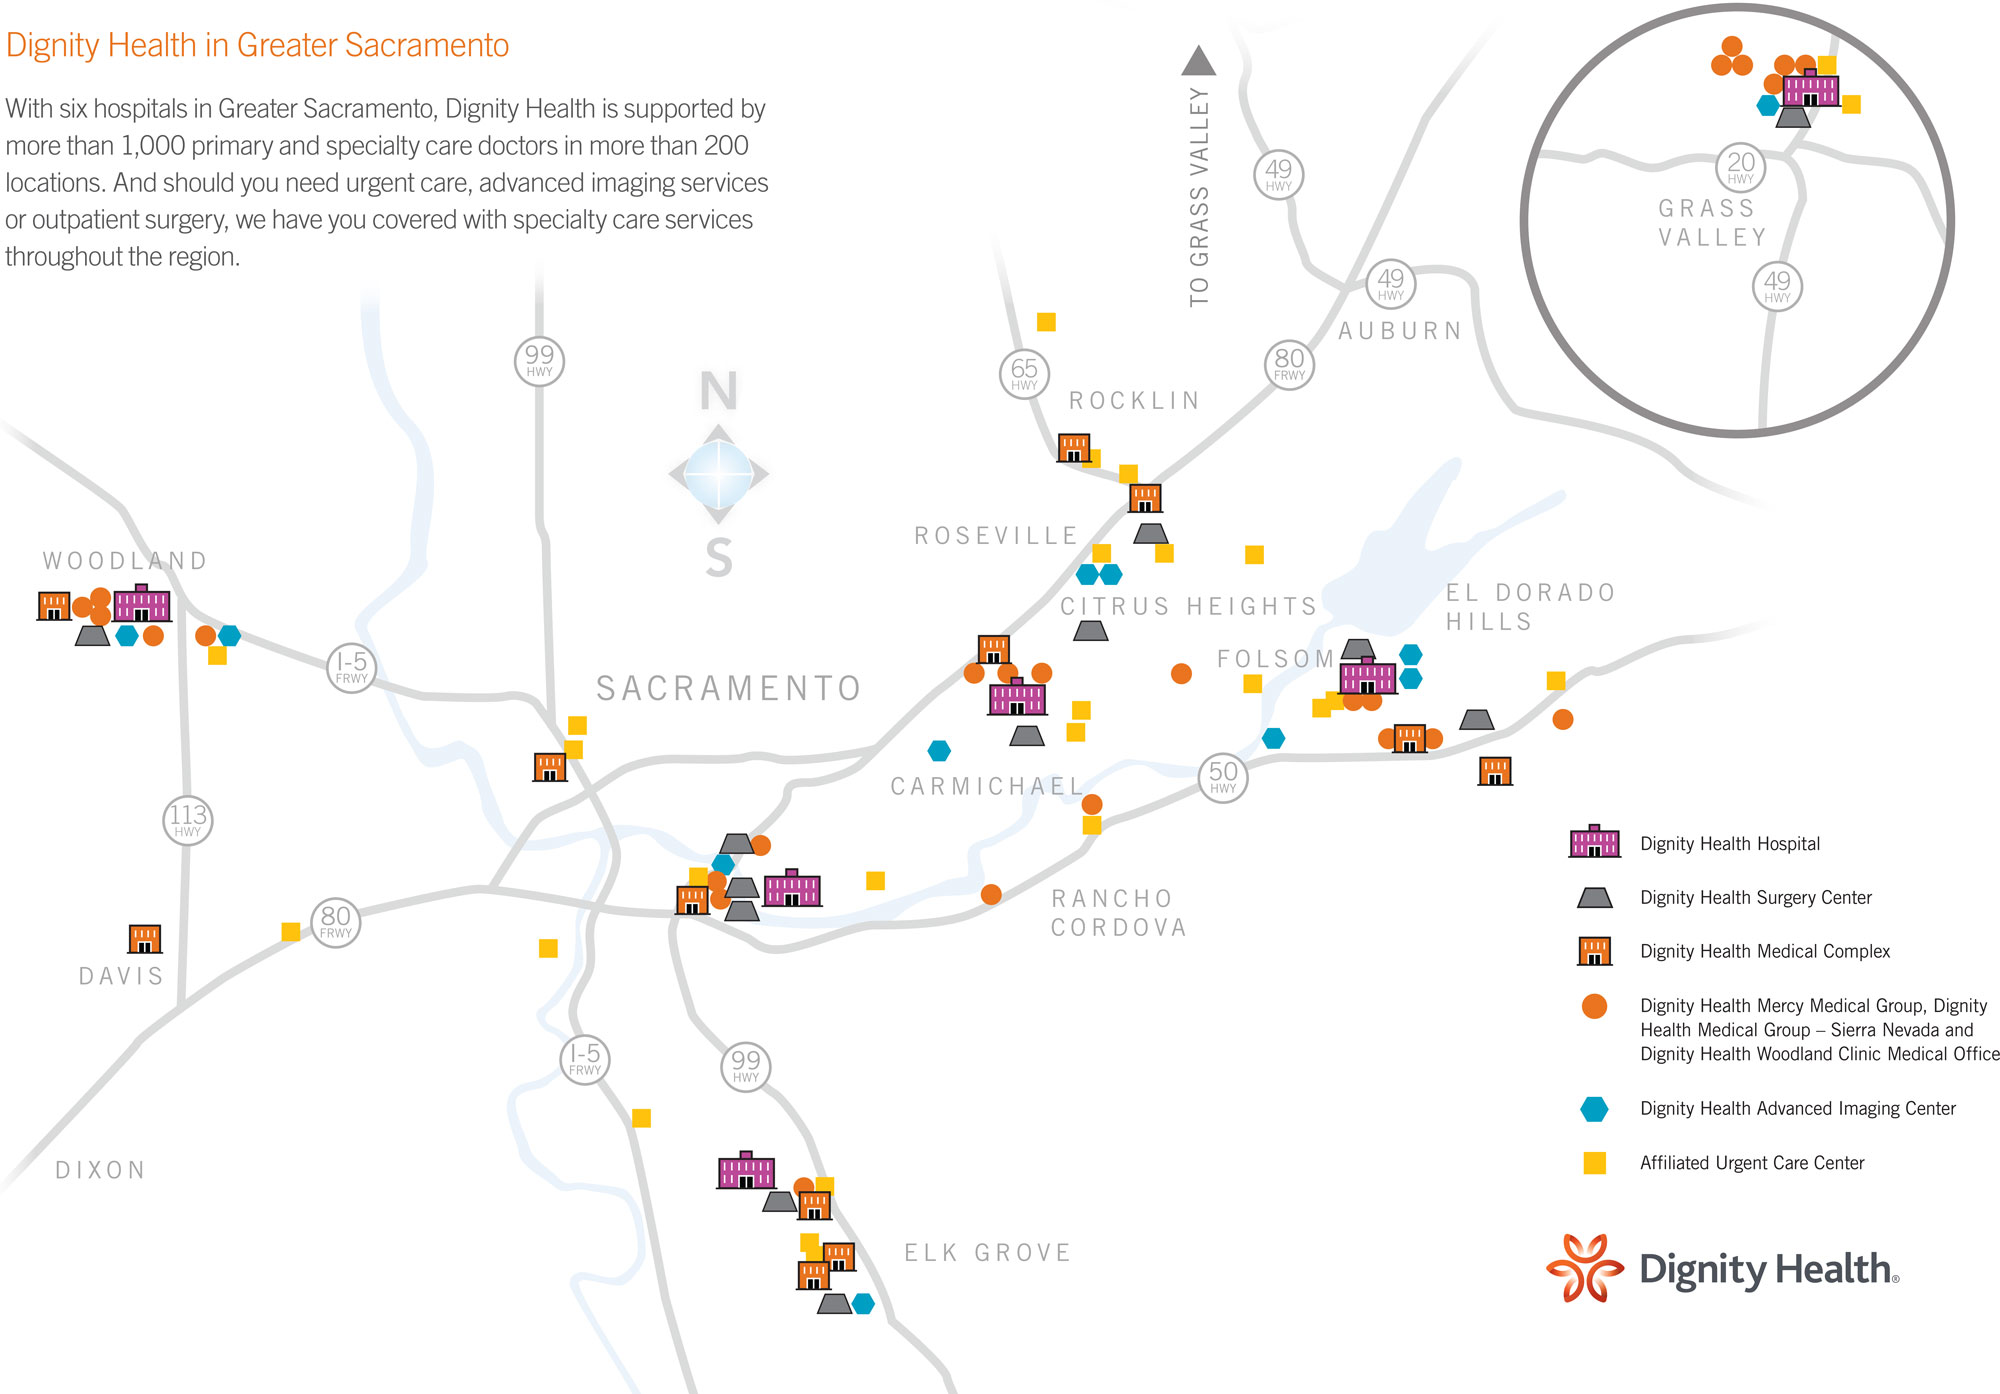 map of Sacramento with dignity health locations